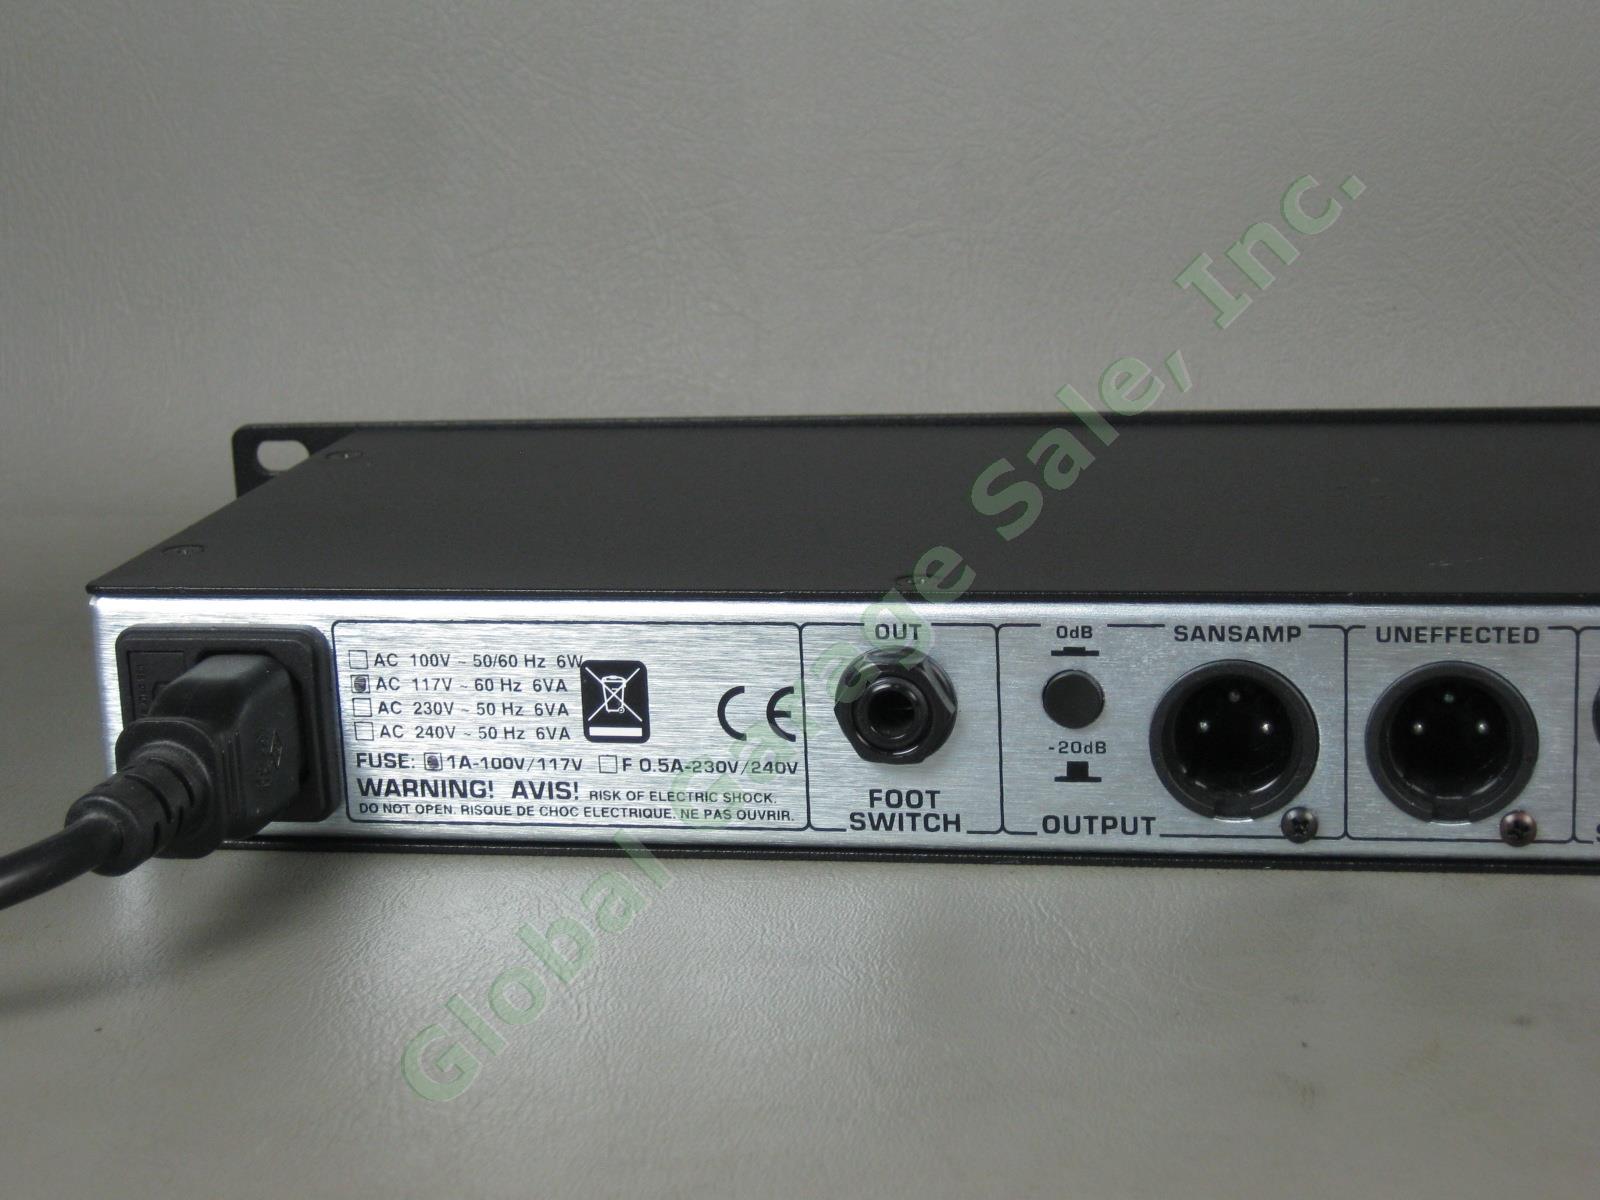 Tech 21 SansAmp RBI Bass Driver Rack Mount Preamp One Owner Exc Cond w/Manual NR 6